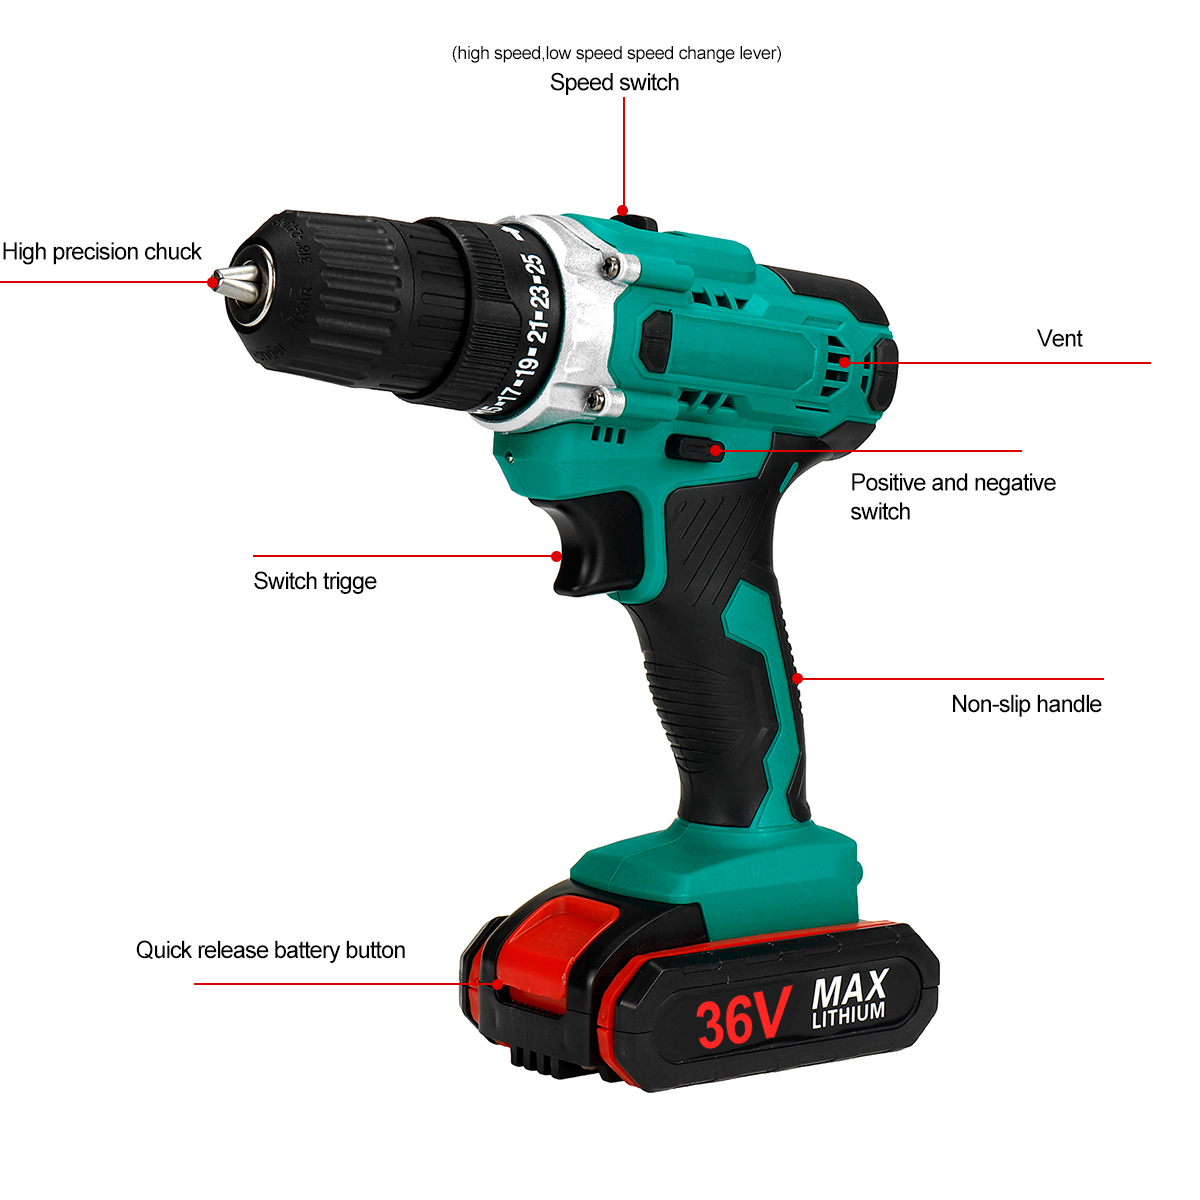 3-in-1-Multifunctional-Cordless-Drill-Driver-Wrench-38-Inch-Chuck-Cordless-Impact-Drill-Driver-W-Non-1868313-10